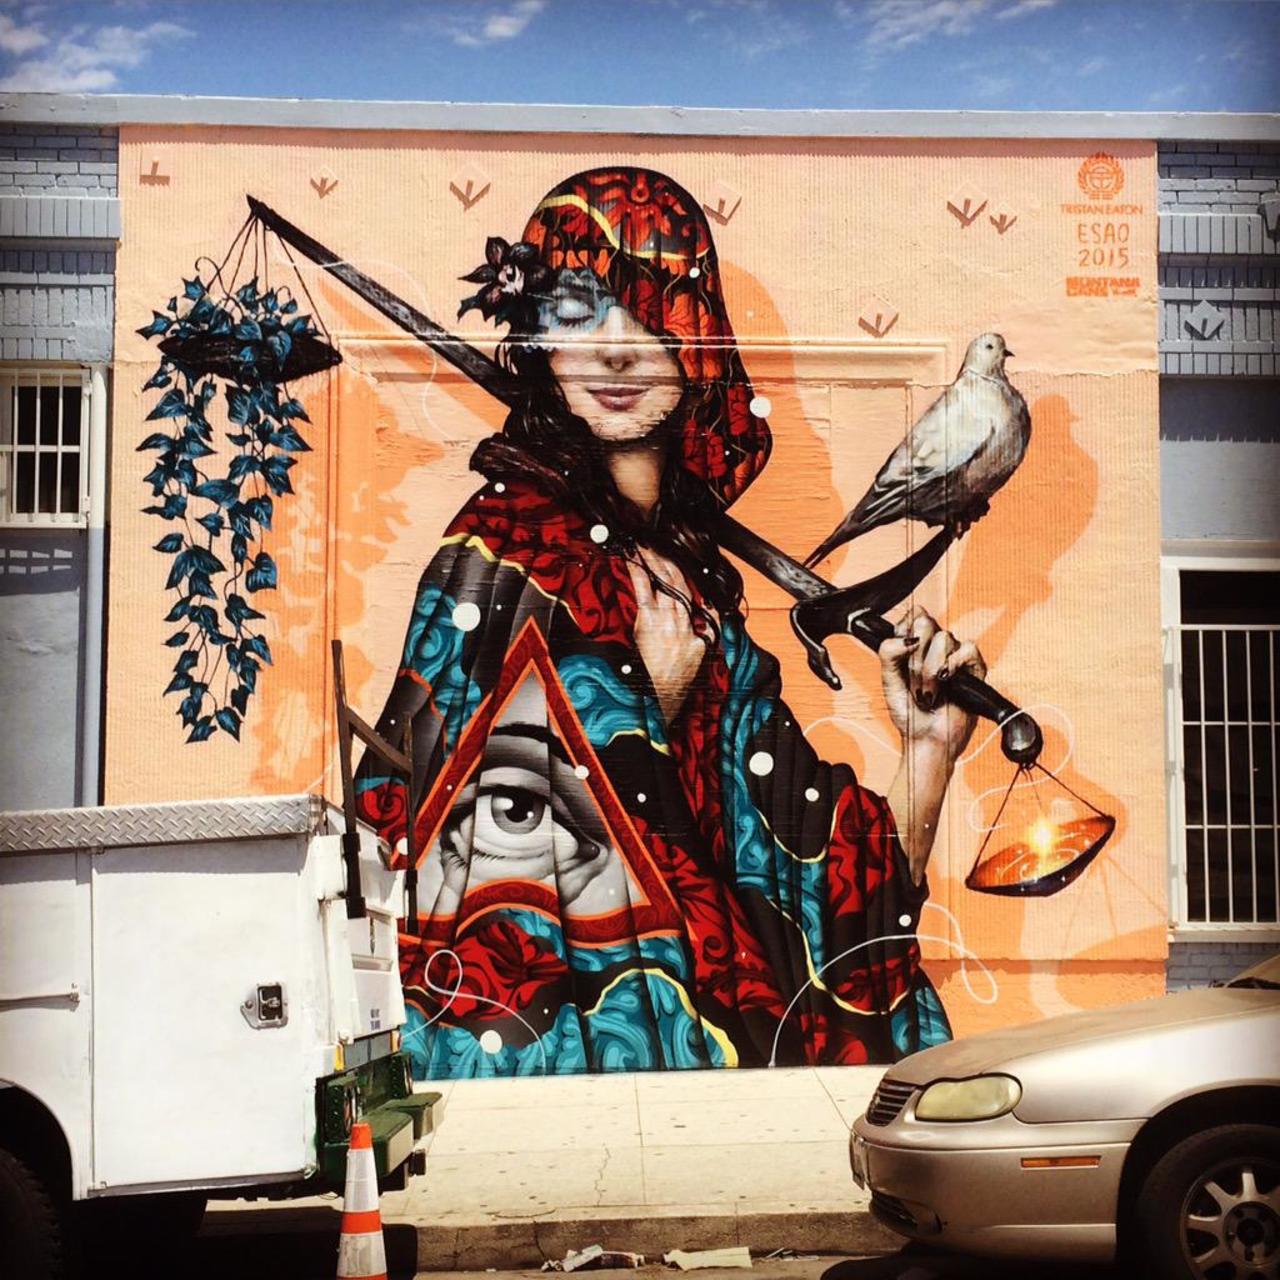 Sunday #streetart #mural of a #gypsy or a #pirate #lady with #dove #sword #graffiti #artisnotdead #artiseverywhere http://t.co/lI8ViwYcwr